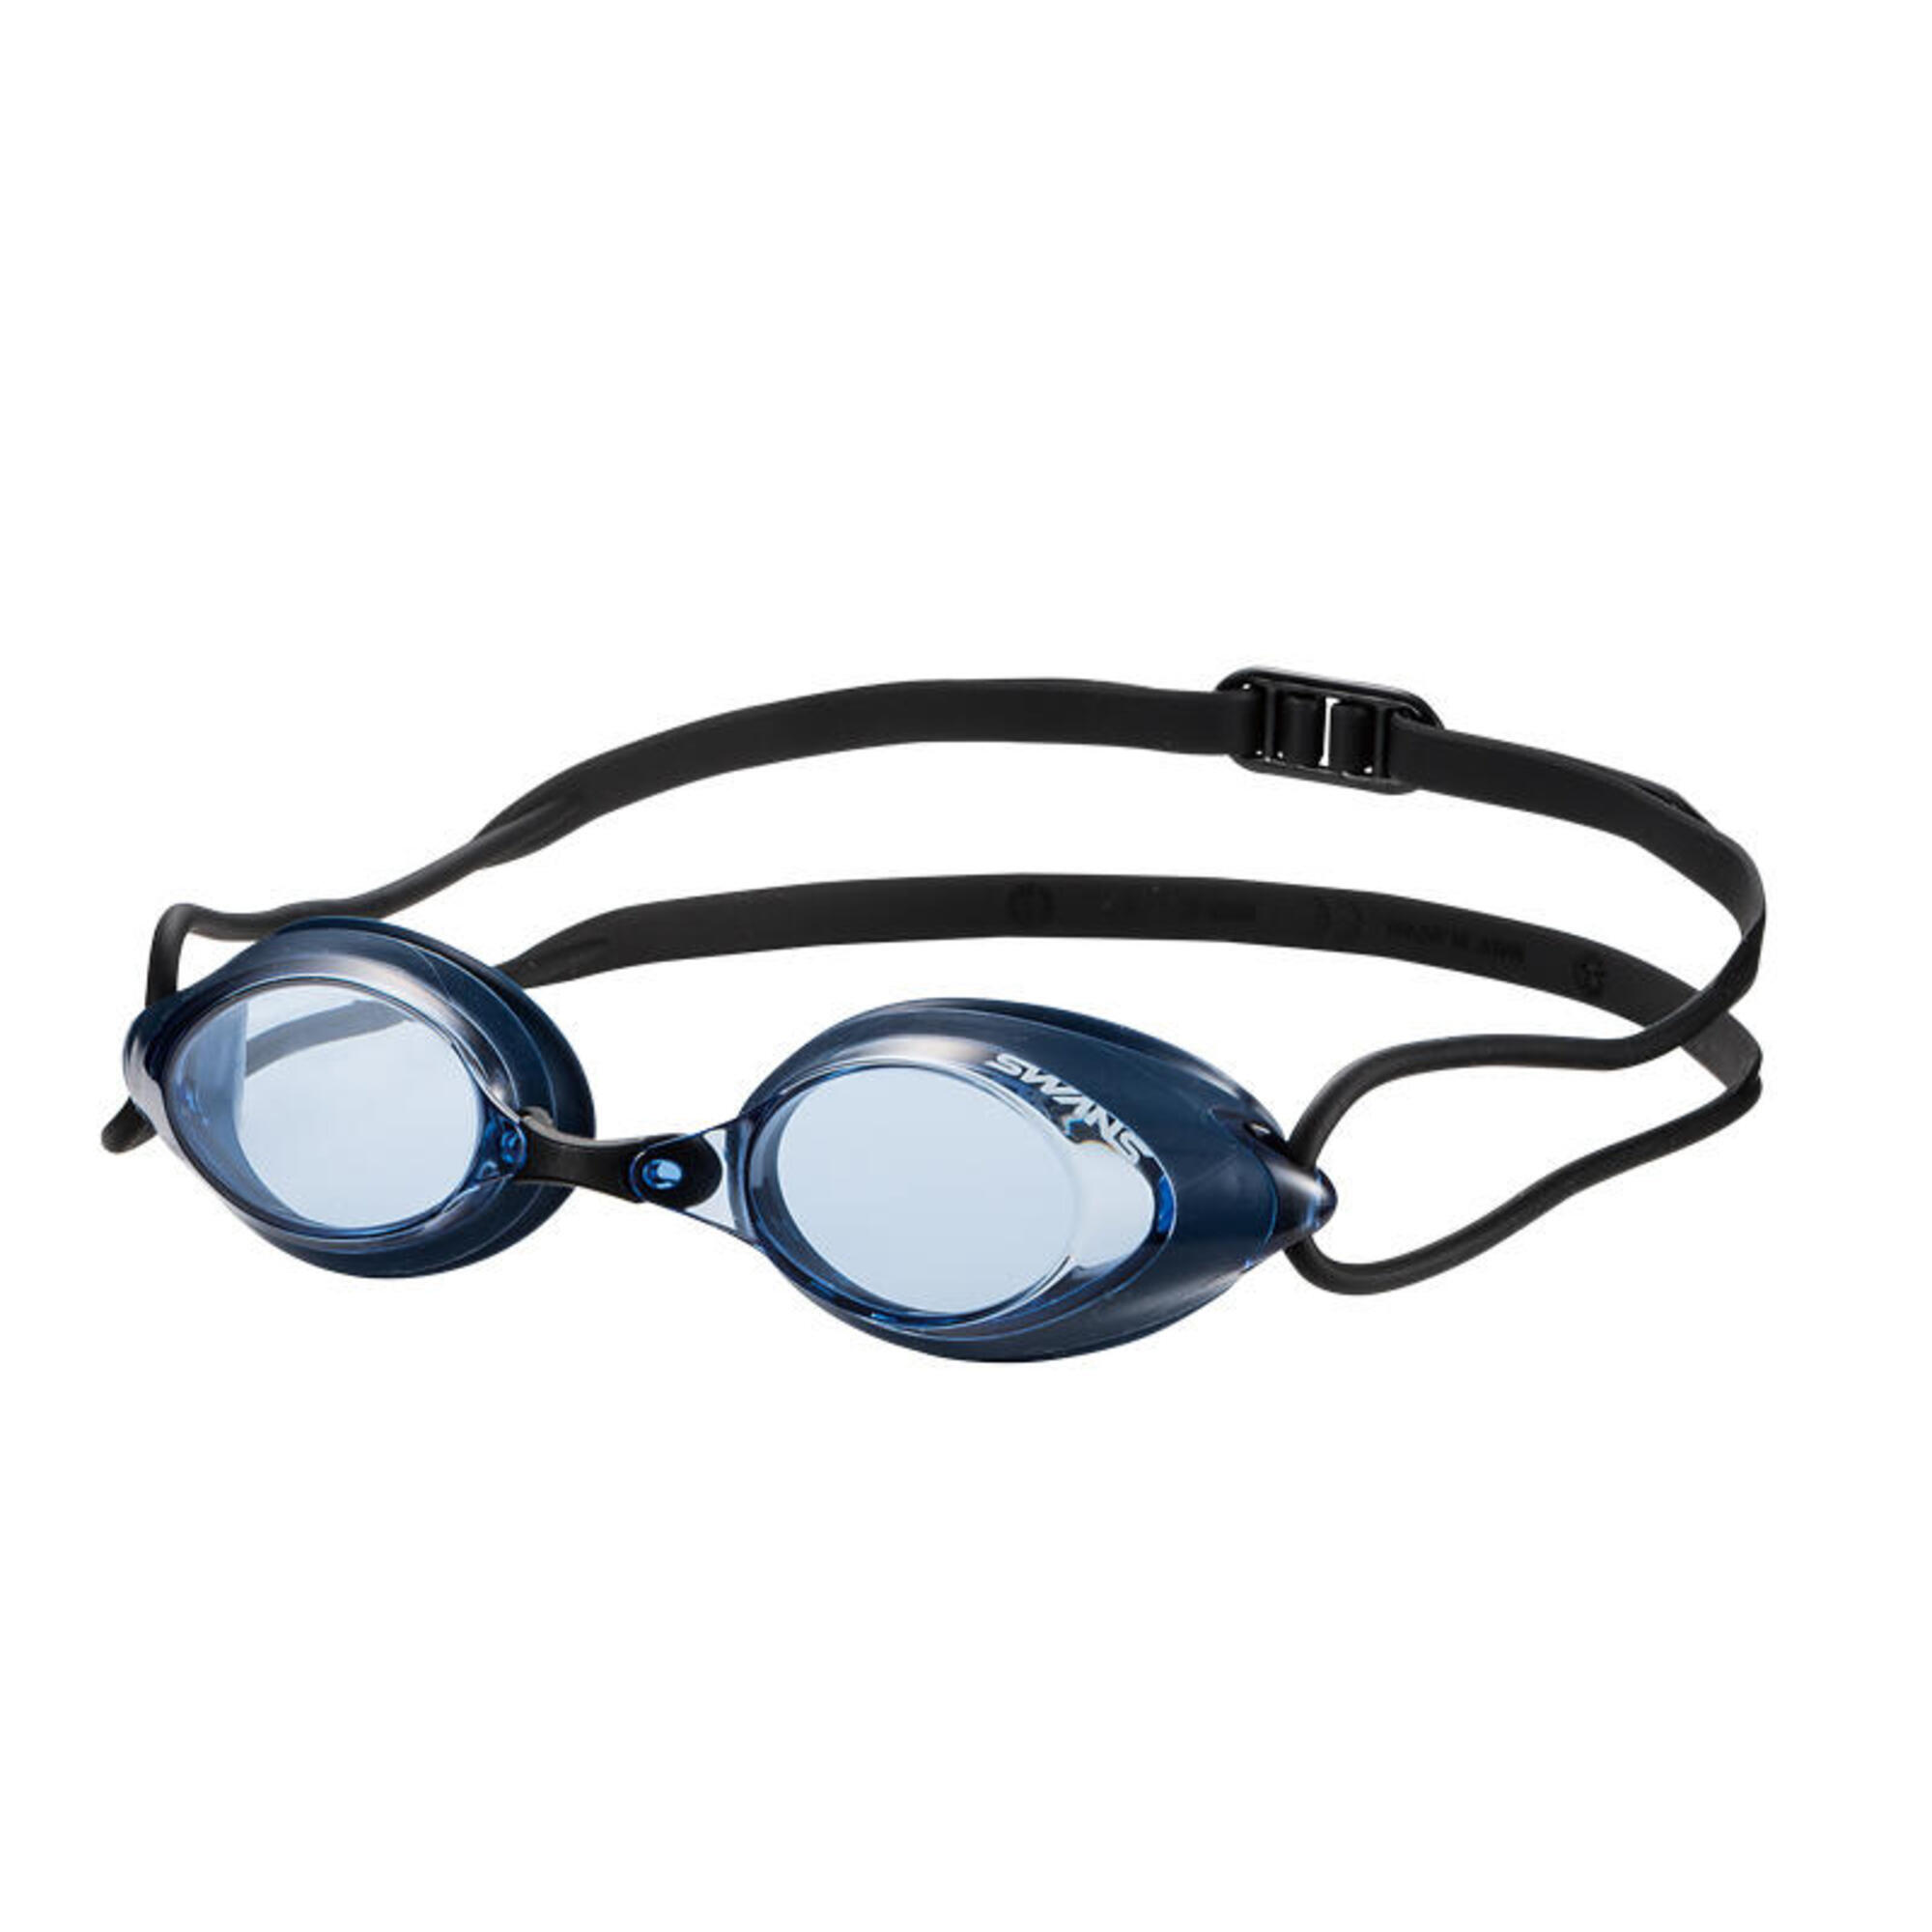 [SWN-SRXN] Competition Swimming Goggles - Royal blue